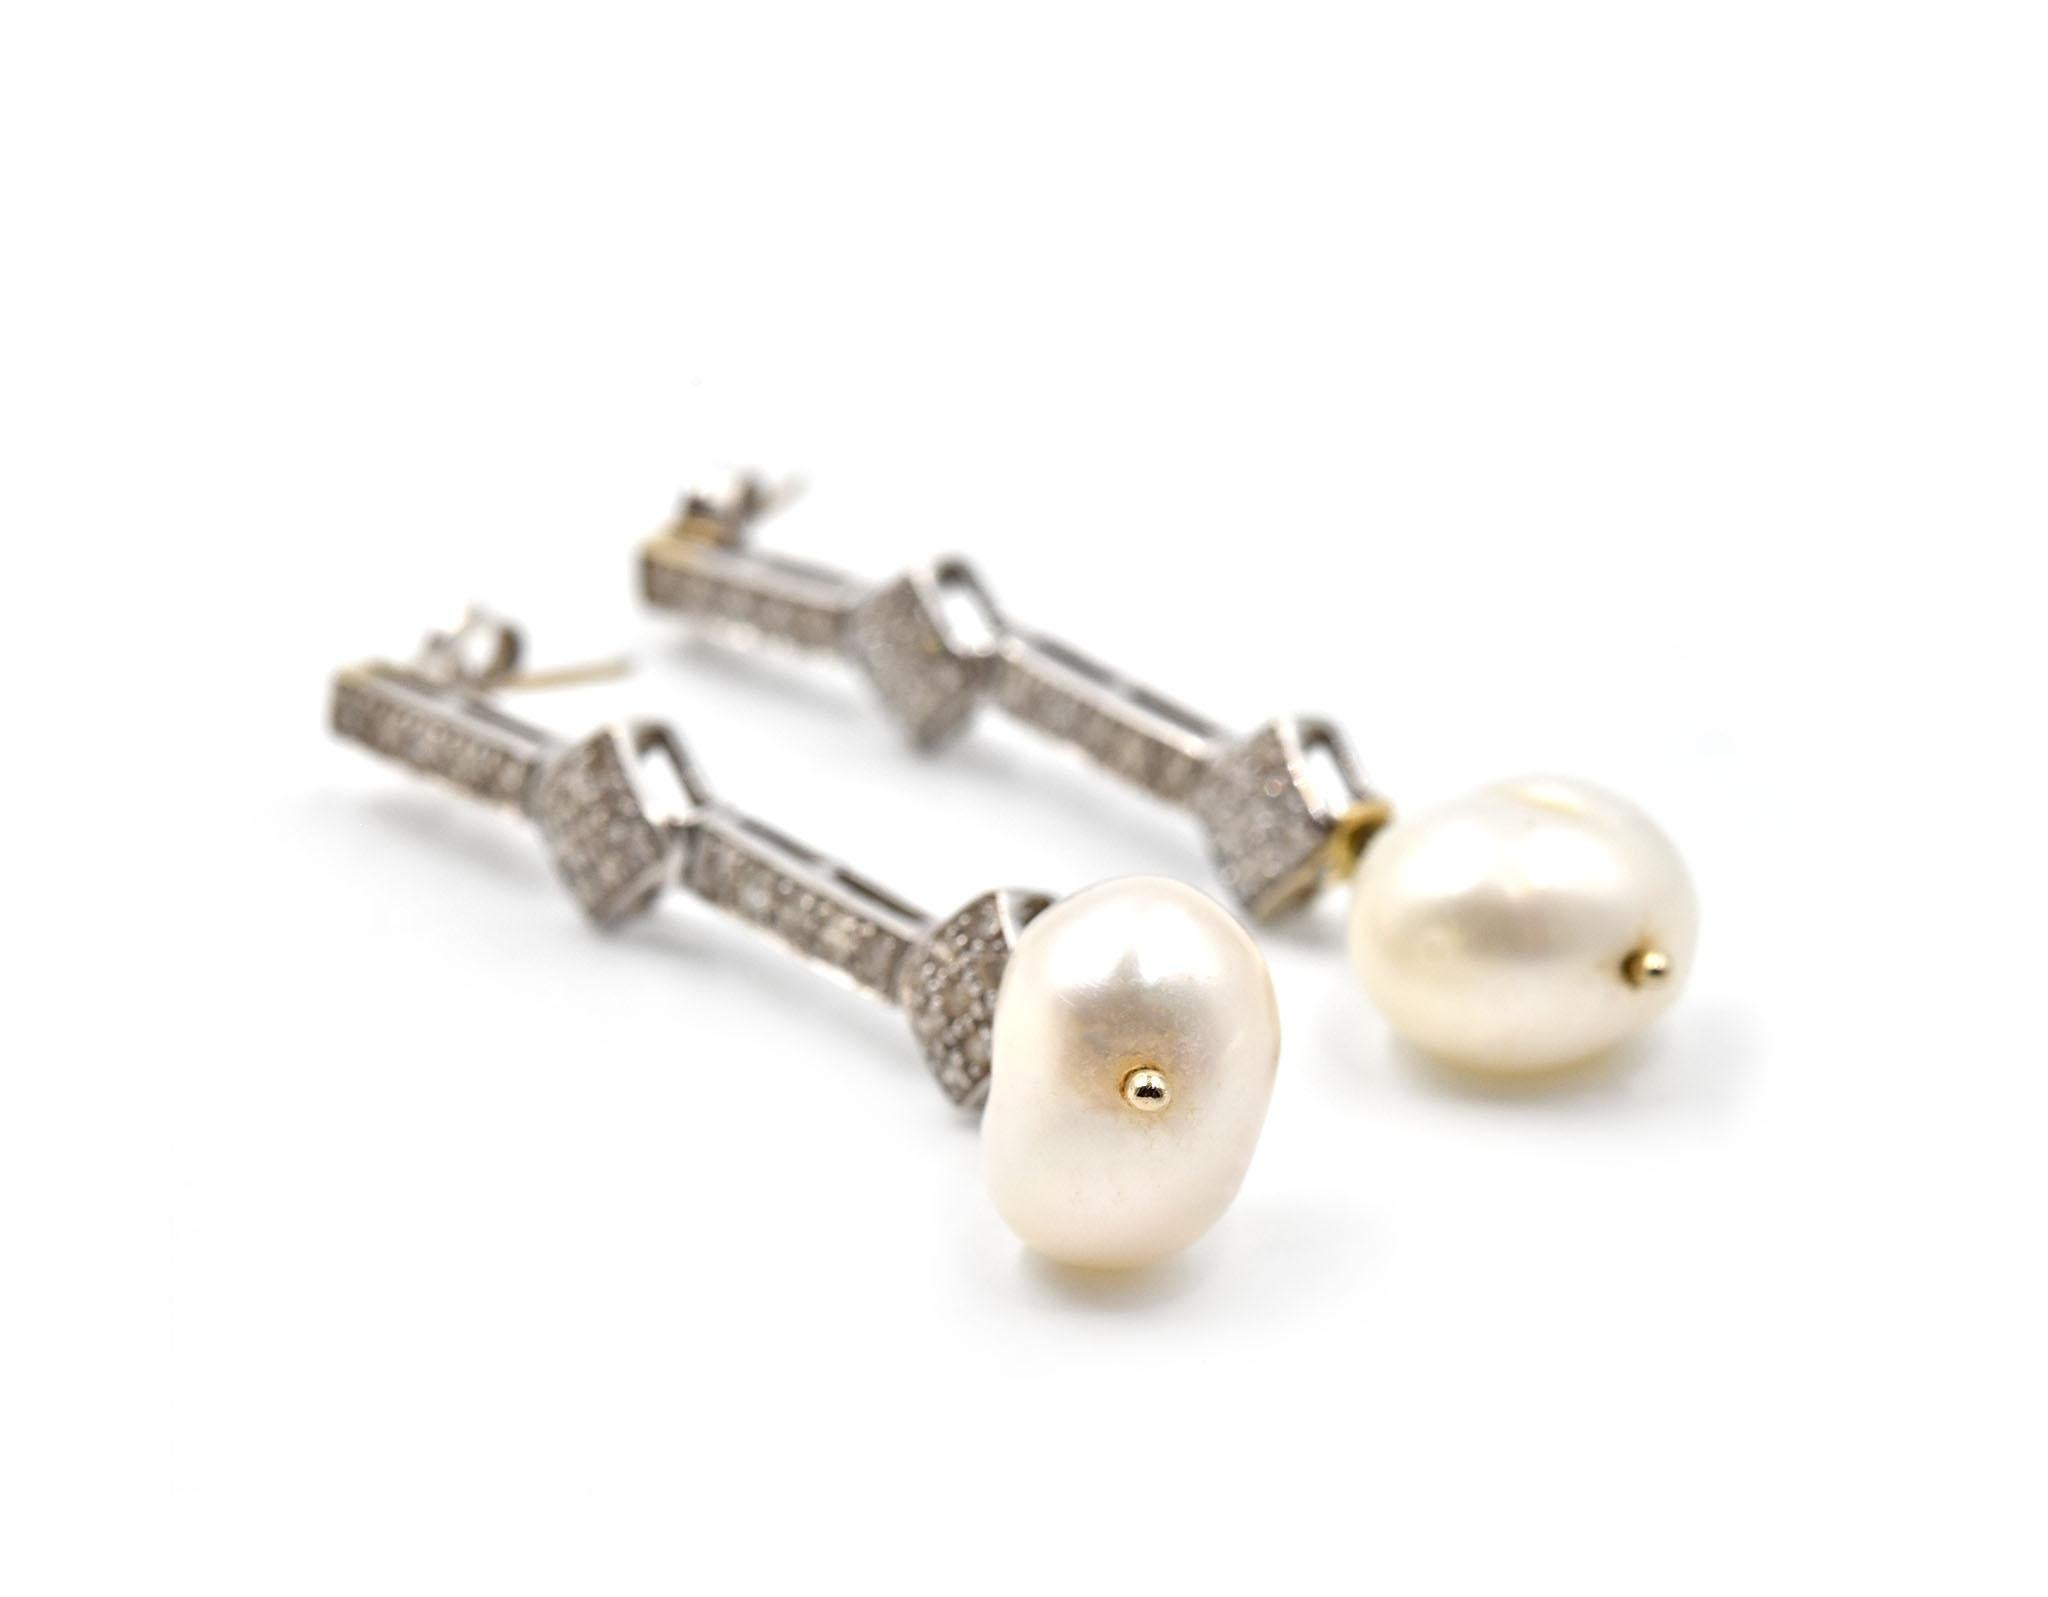 Designer: custom design
Material: 18k white gold
Diamonds: 56 round brilliant cut = 0.76 carat weight
Color: I
Clarity: SI1
Pearls: 11.5-12mm cultured pearls
Fastenings: friction backs
Dimensions: each drop earring is 2-inch long 
Weight: 7.76 grams
